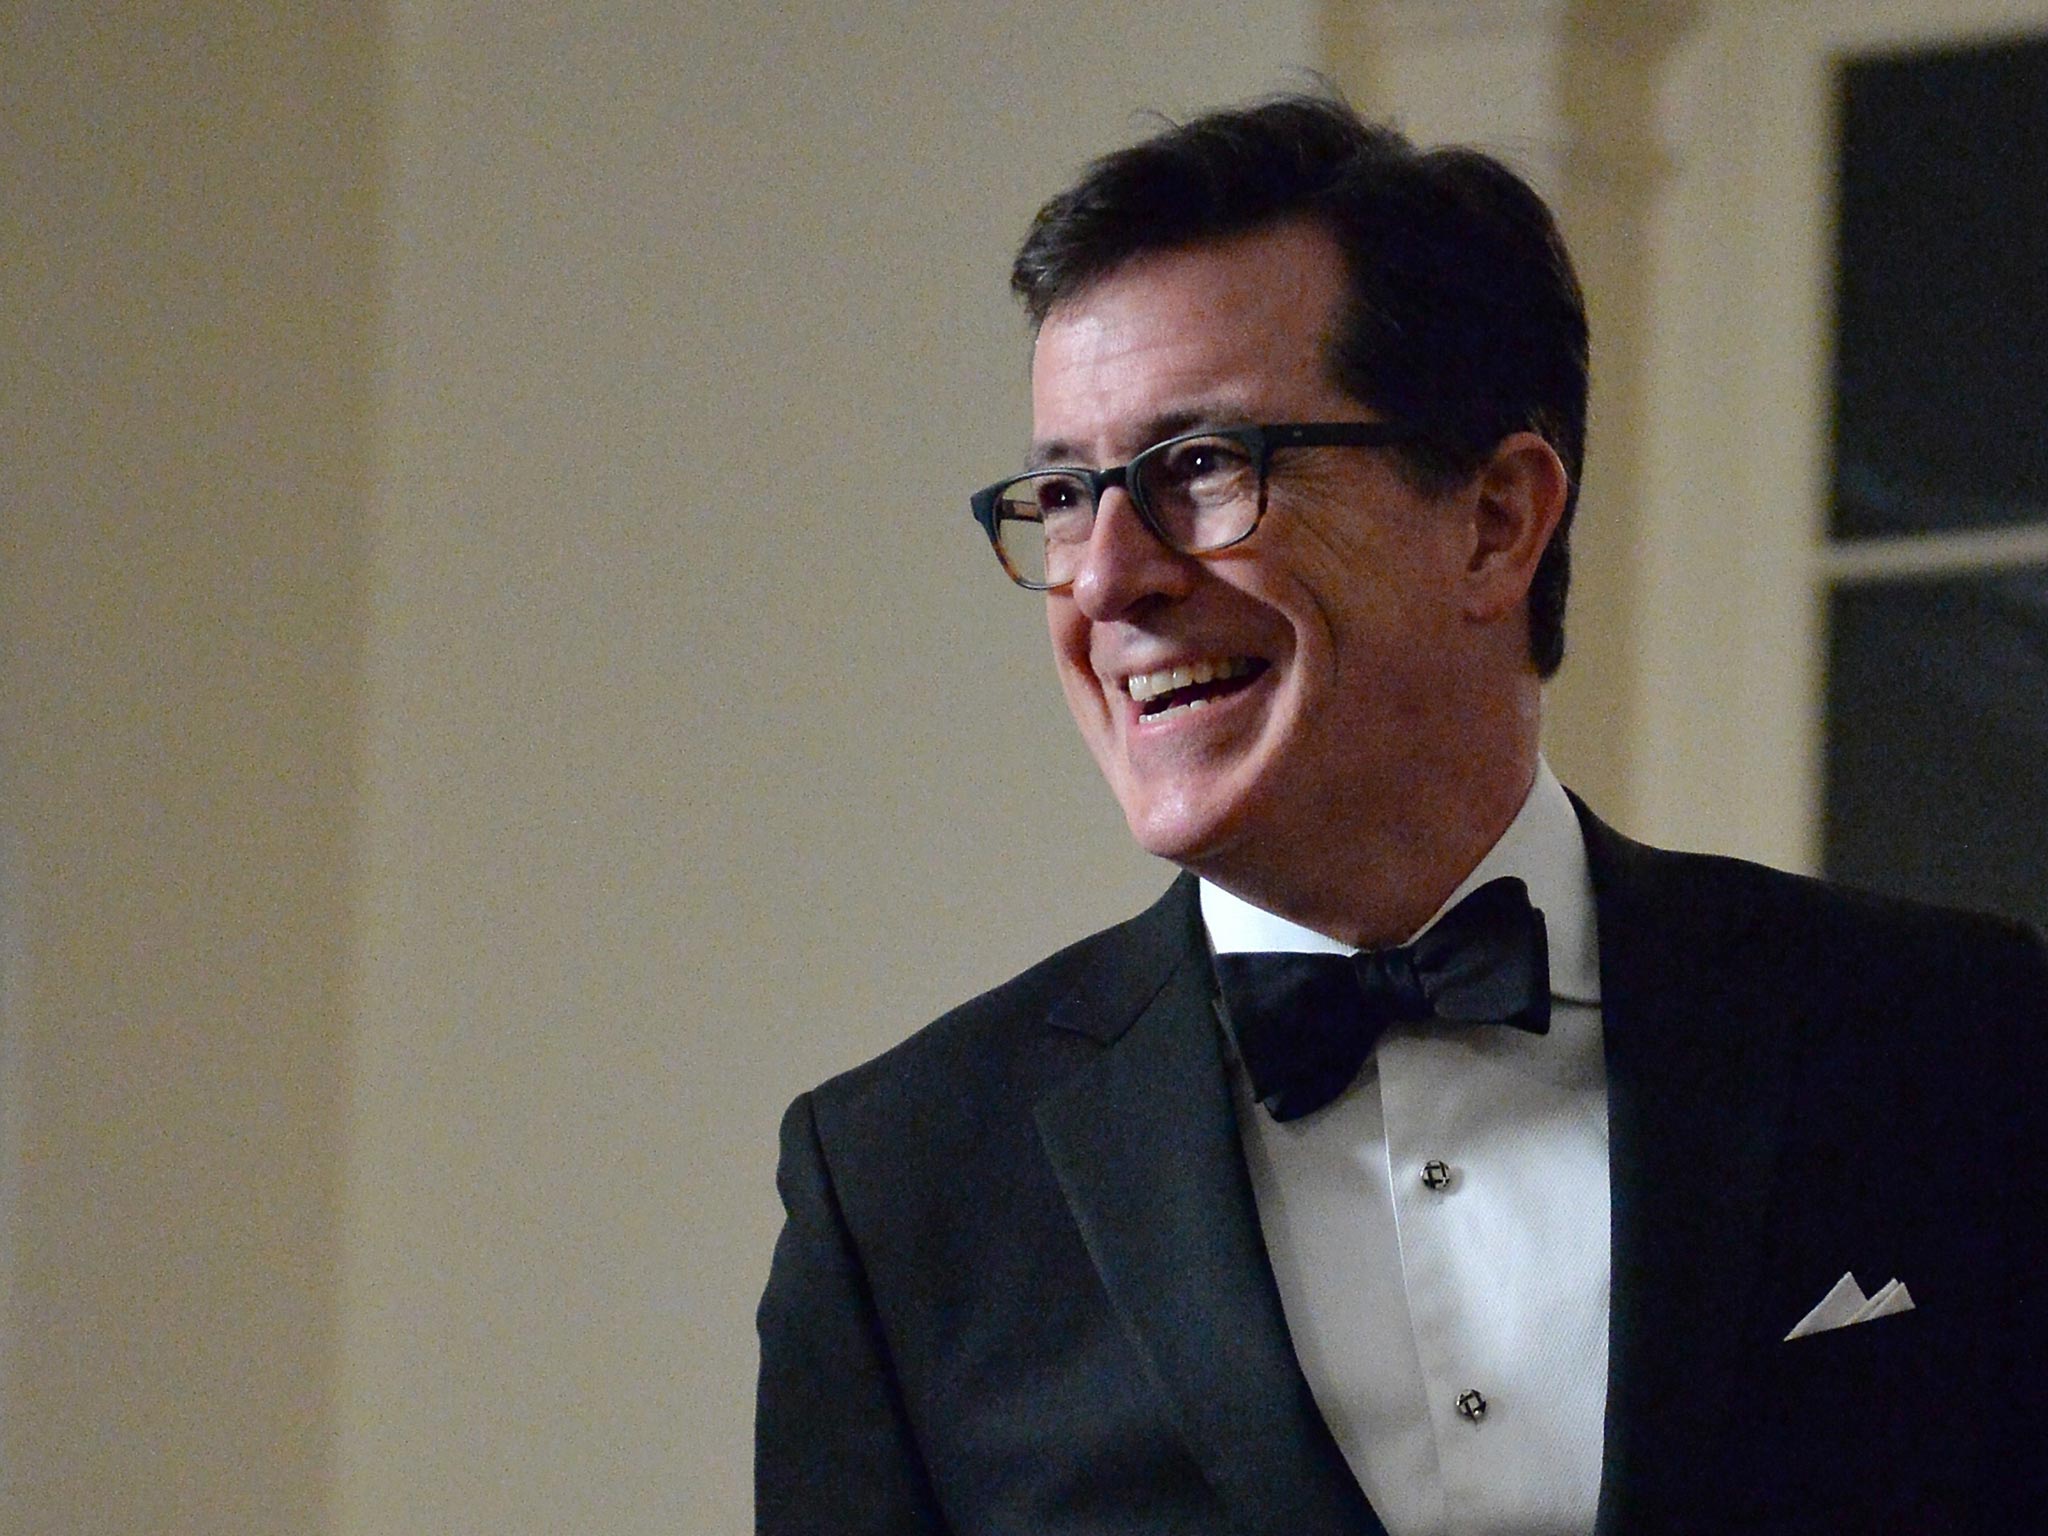 Political comedian Stephen Colbert, who will be replacing David Letterman on 'The Late Show'